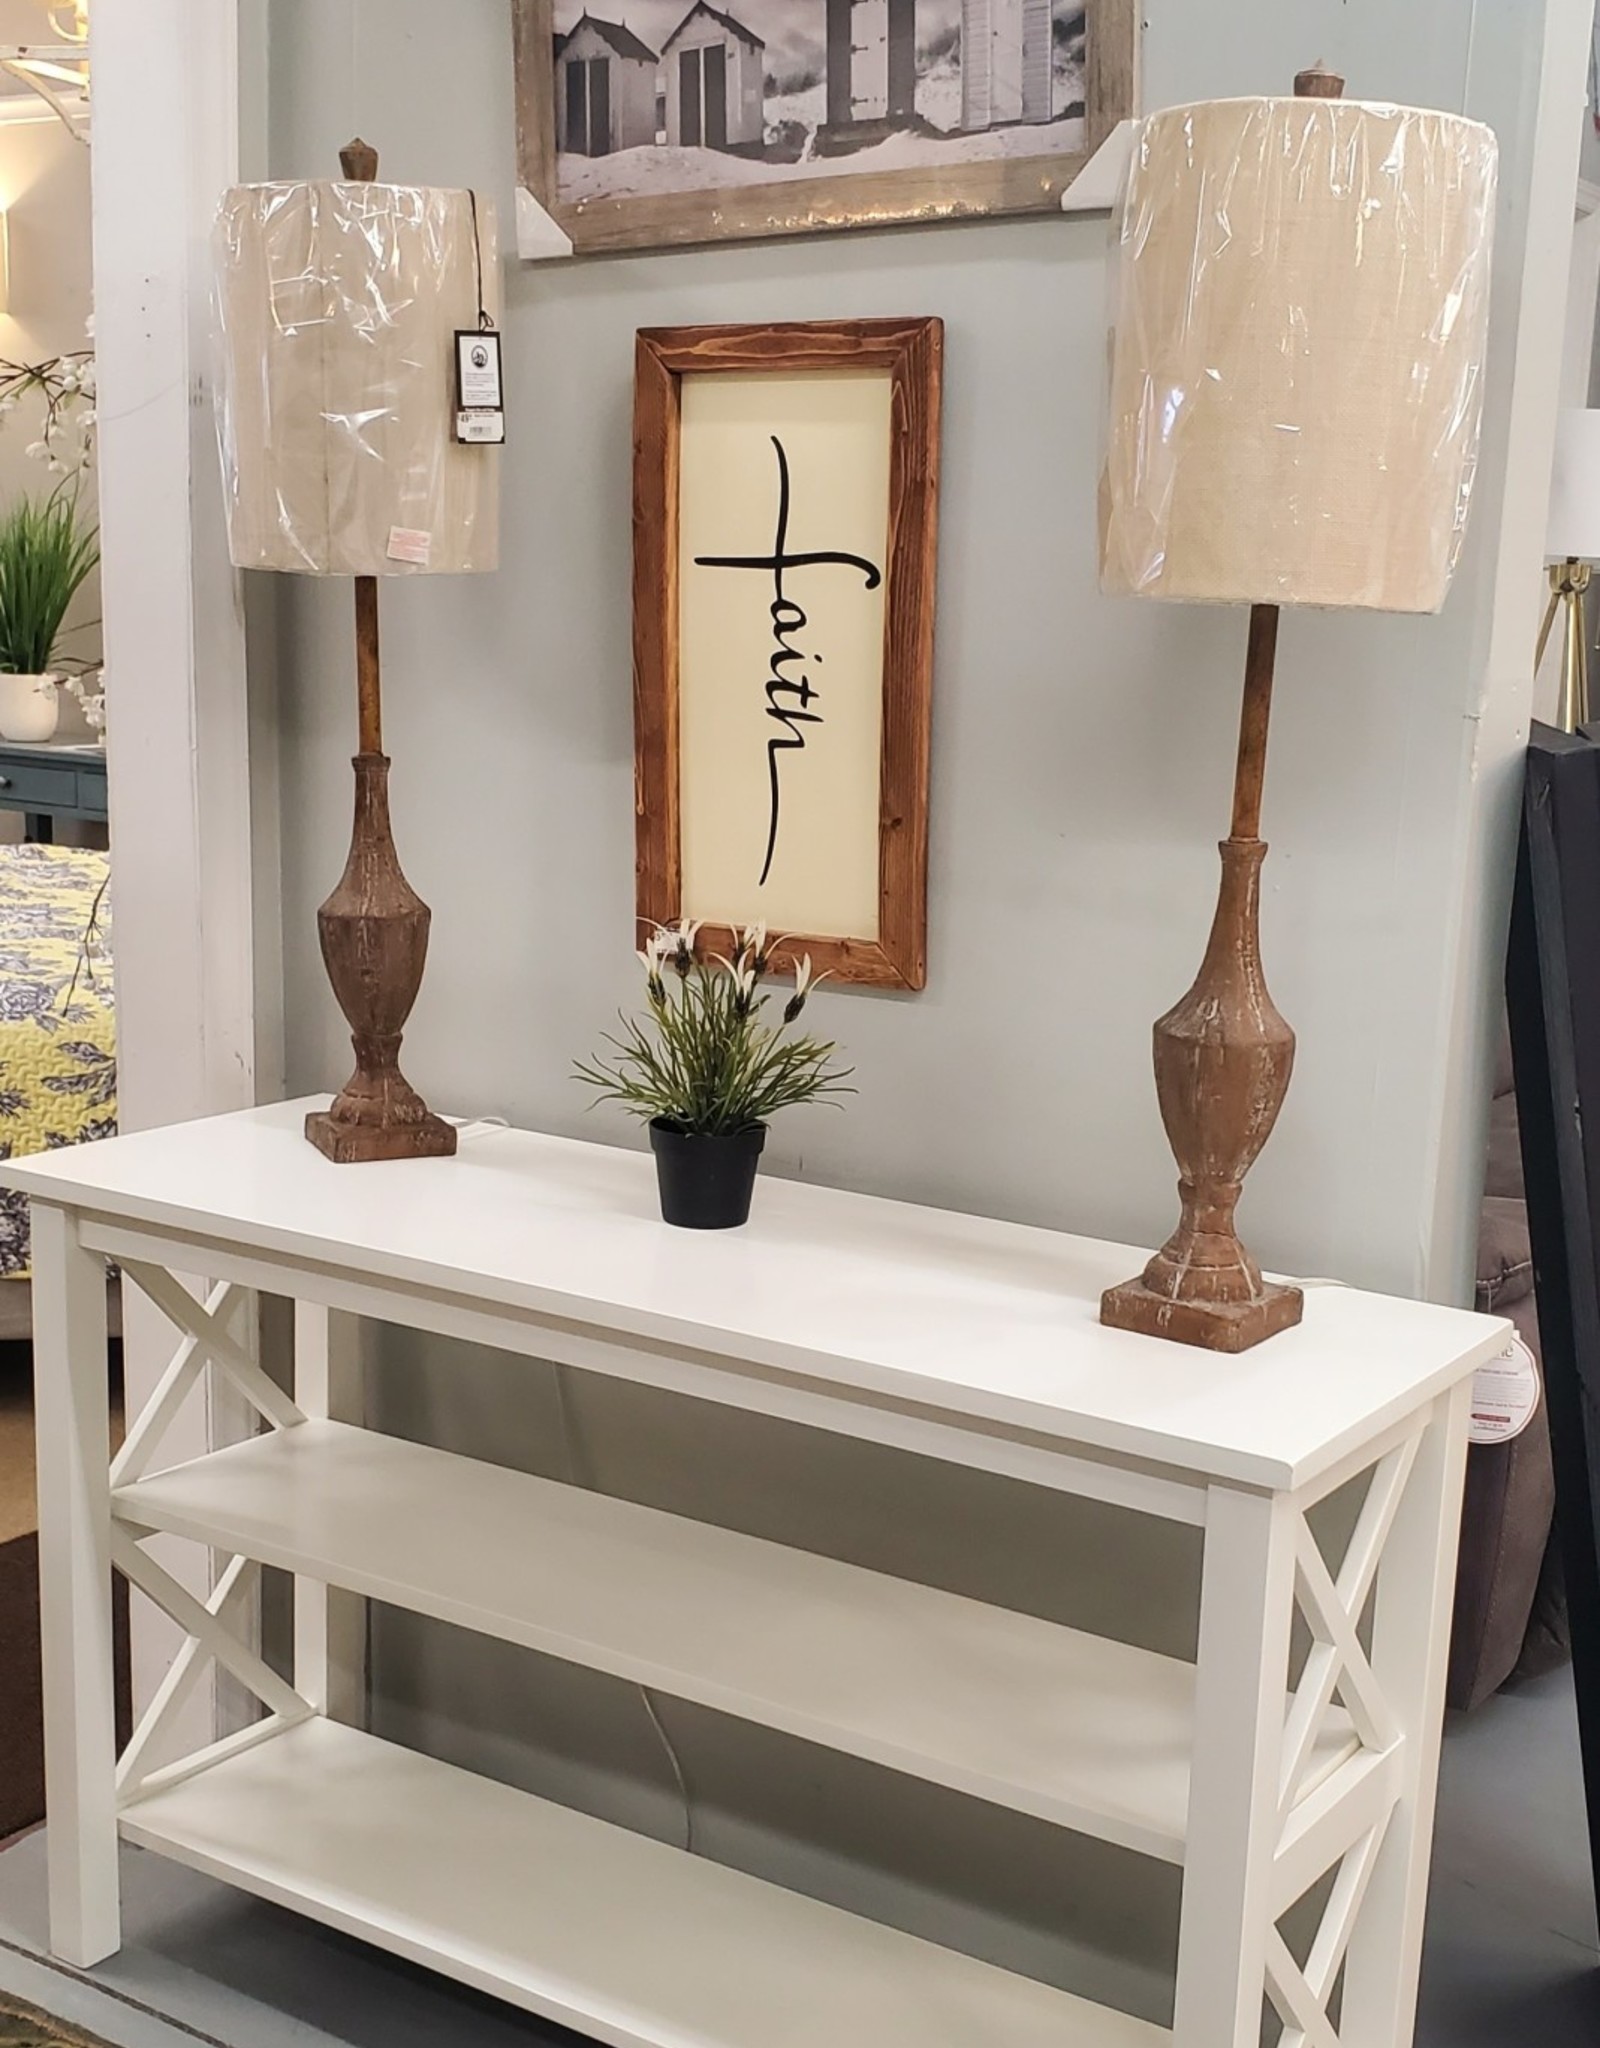 Whitewood Hampton 48" Sofa Table w/ Shelves - 3 Colors Available for order